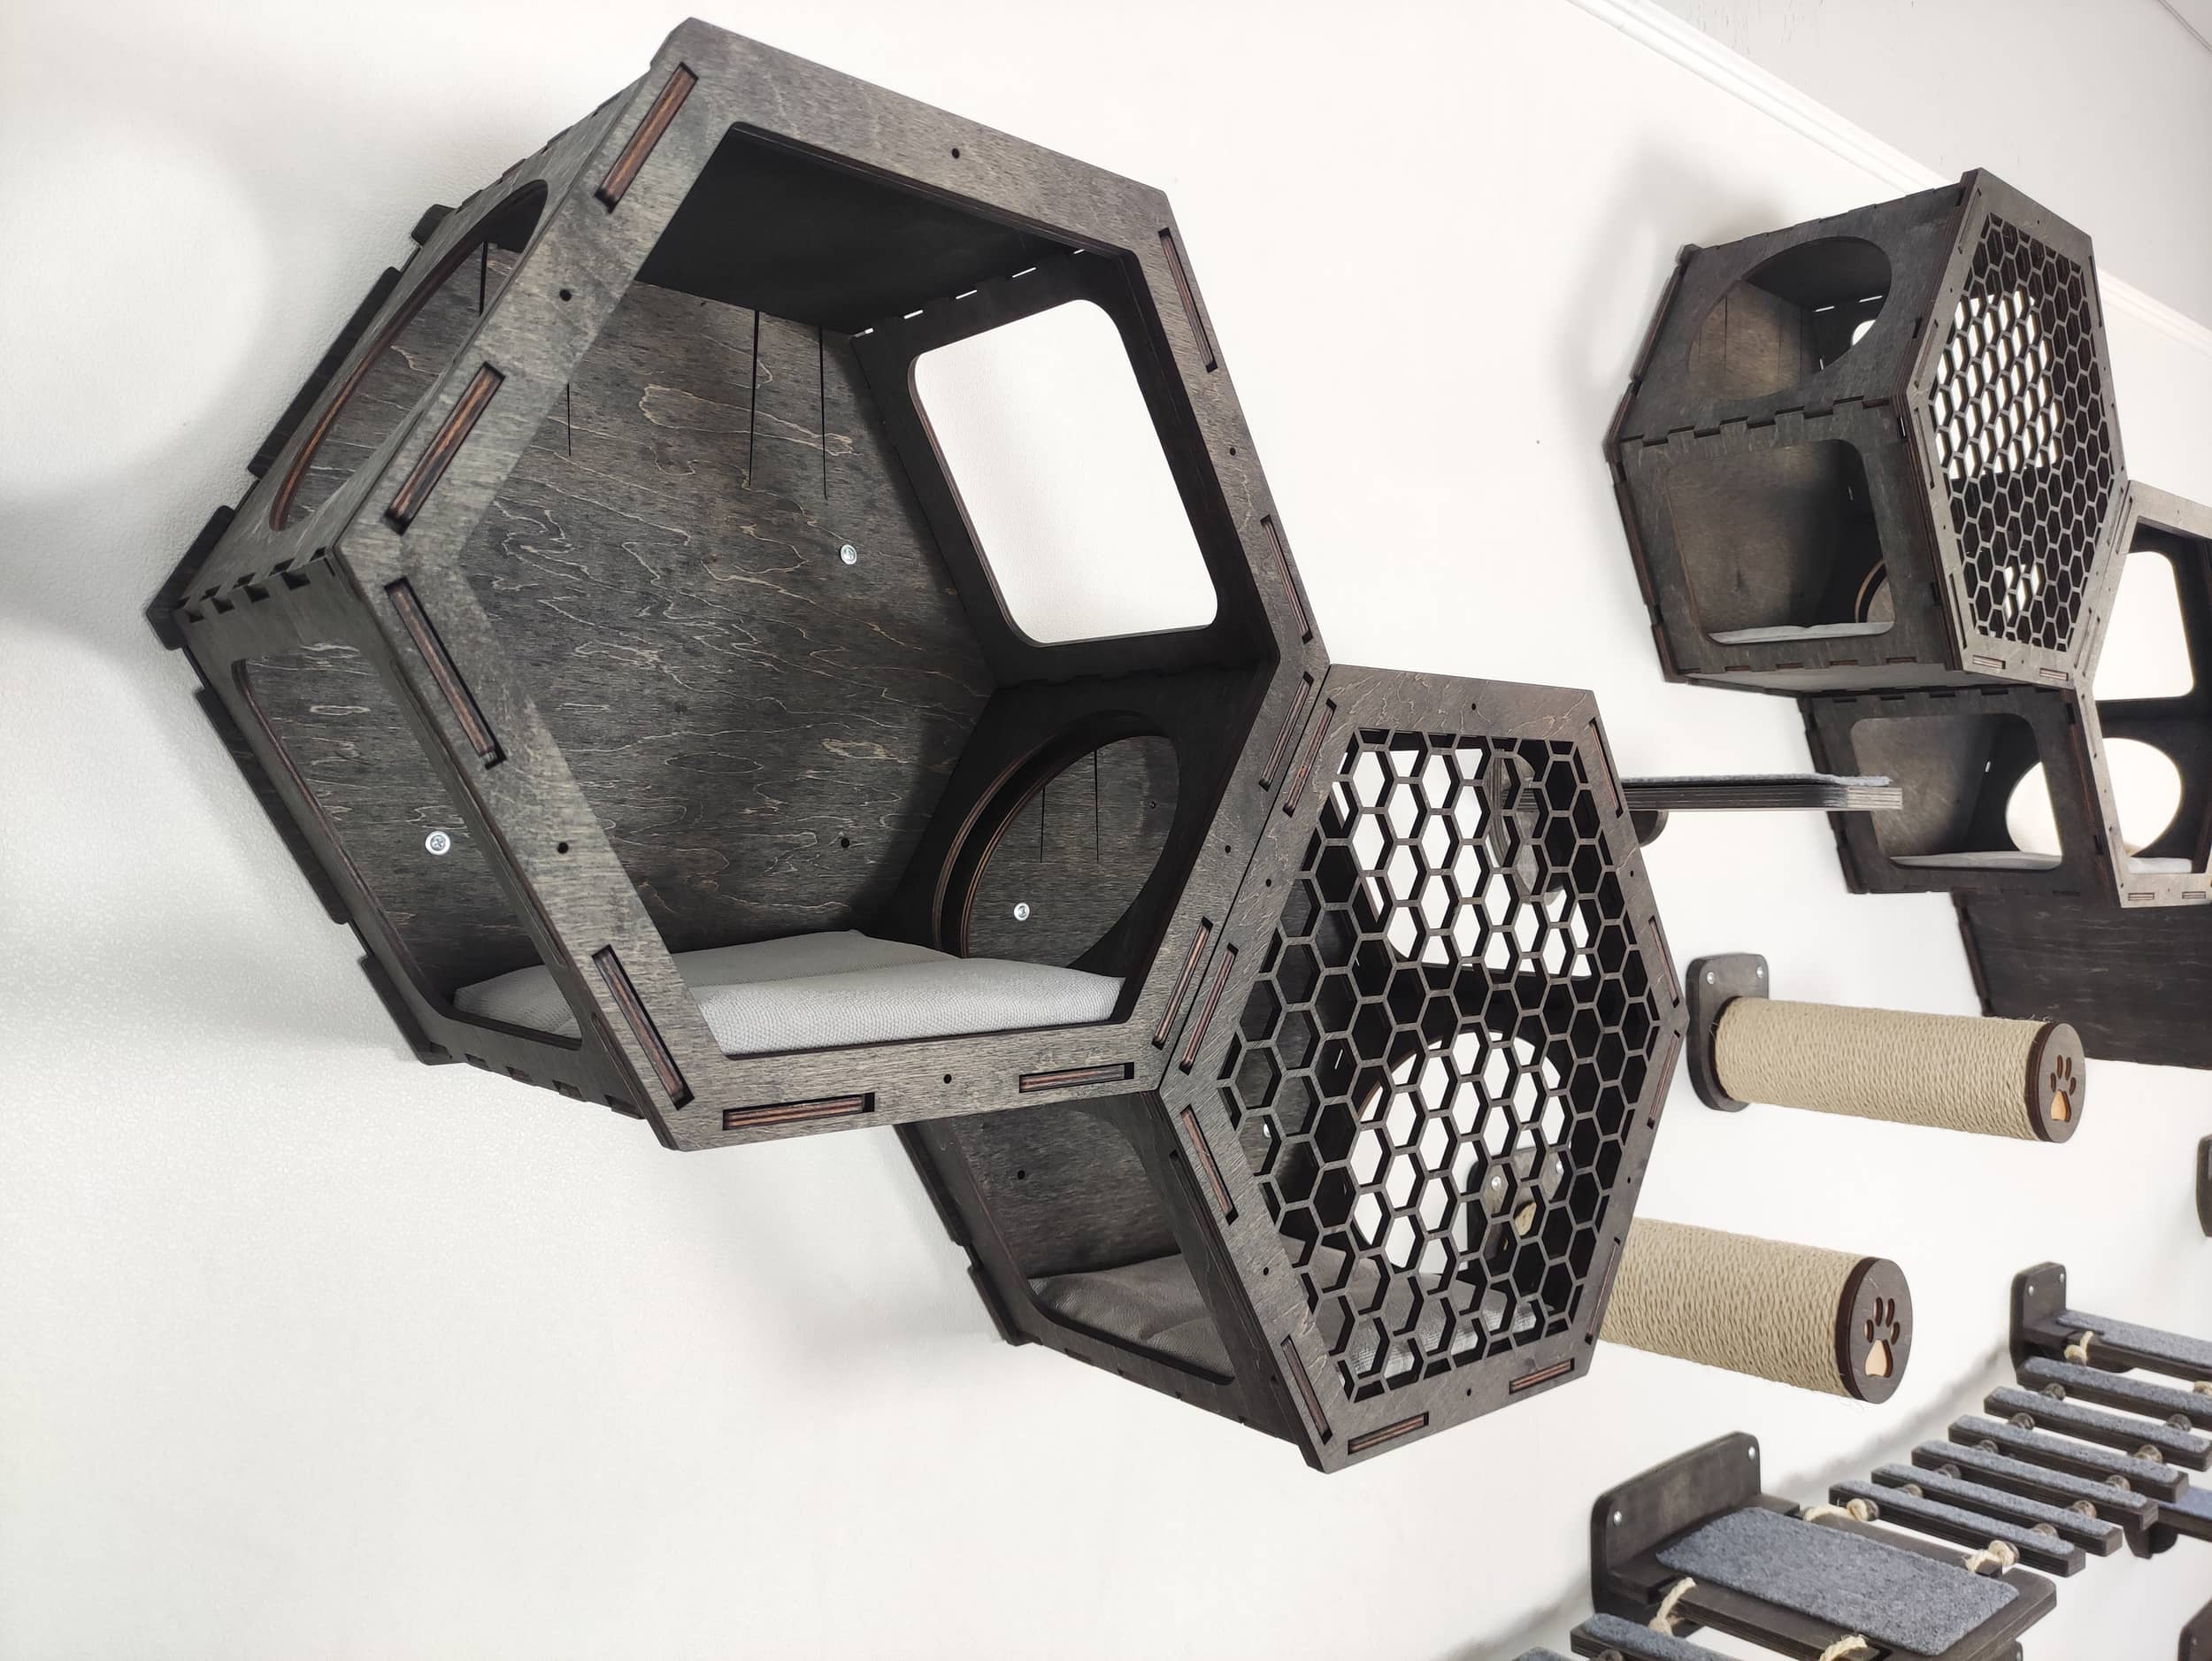 Wall-mounted cat shelves in the form of hexagons